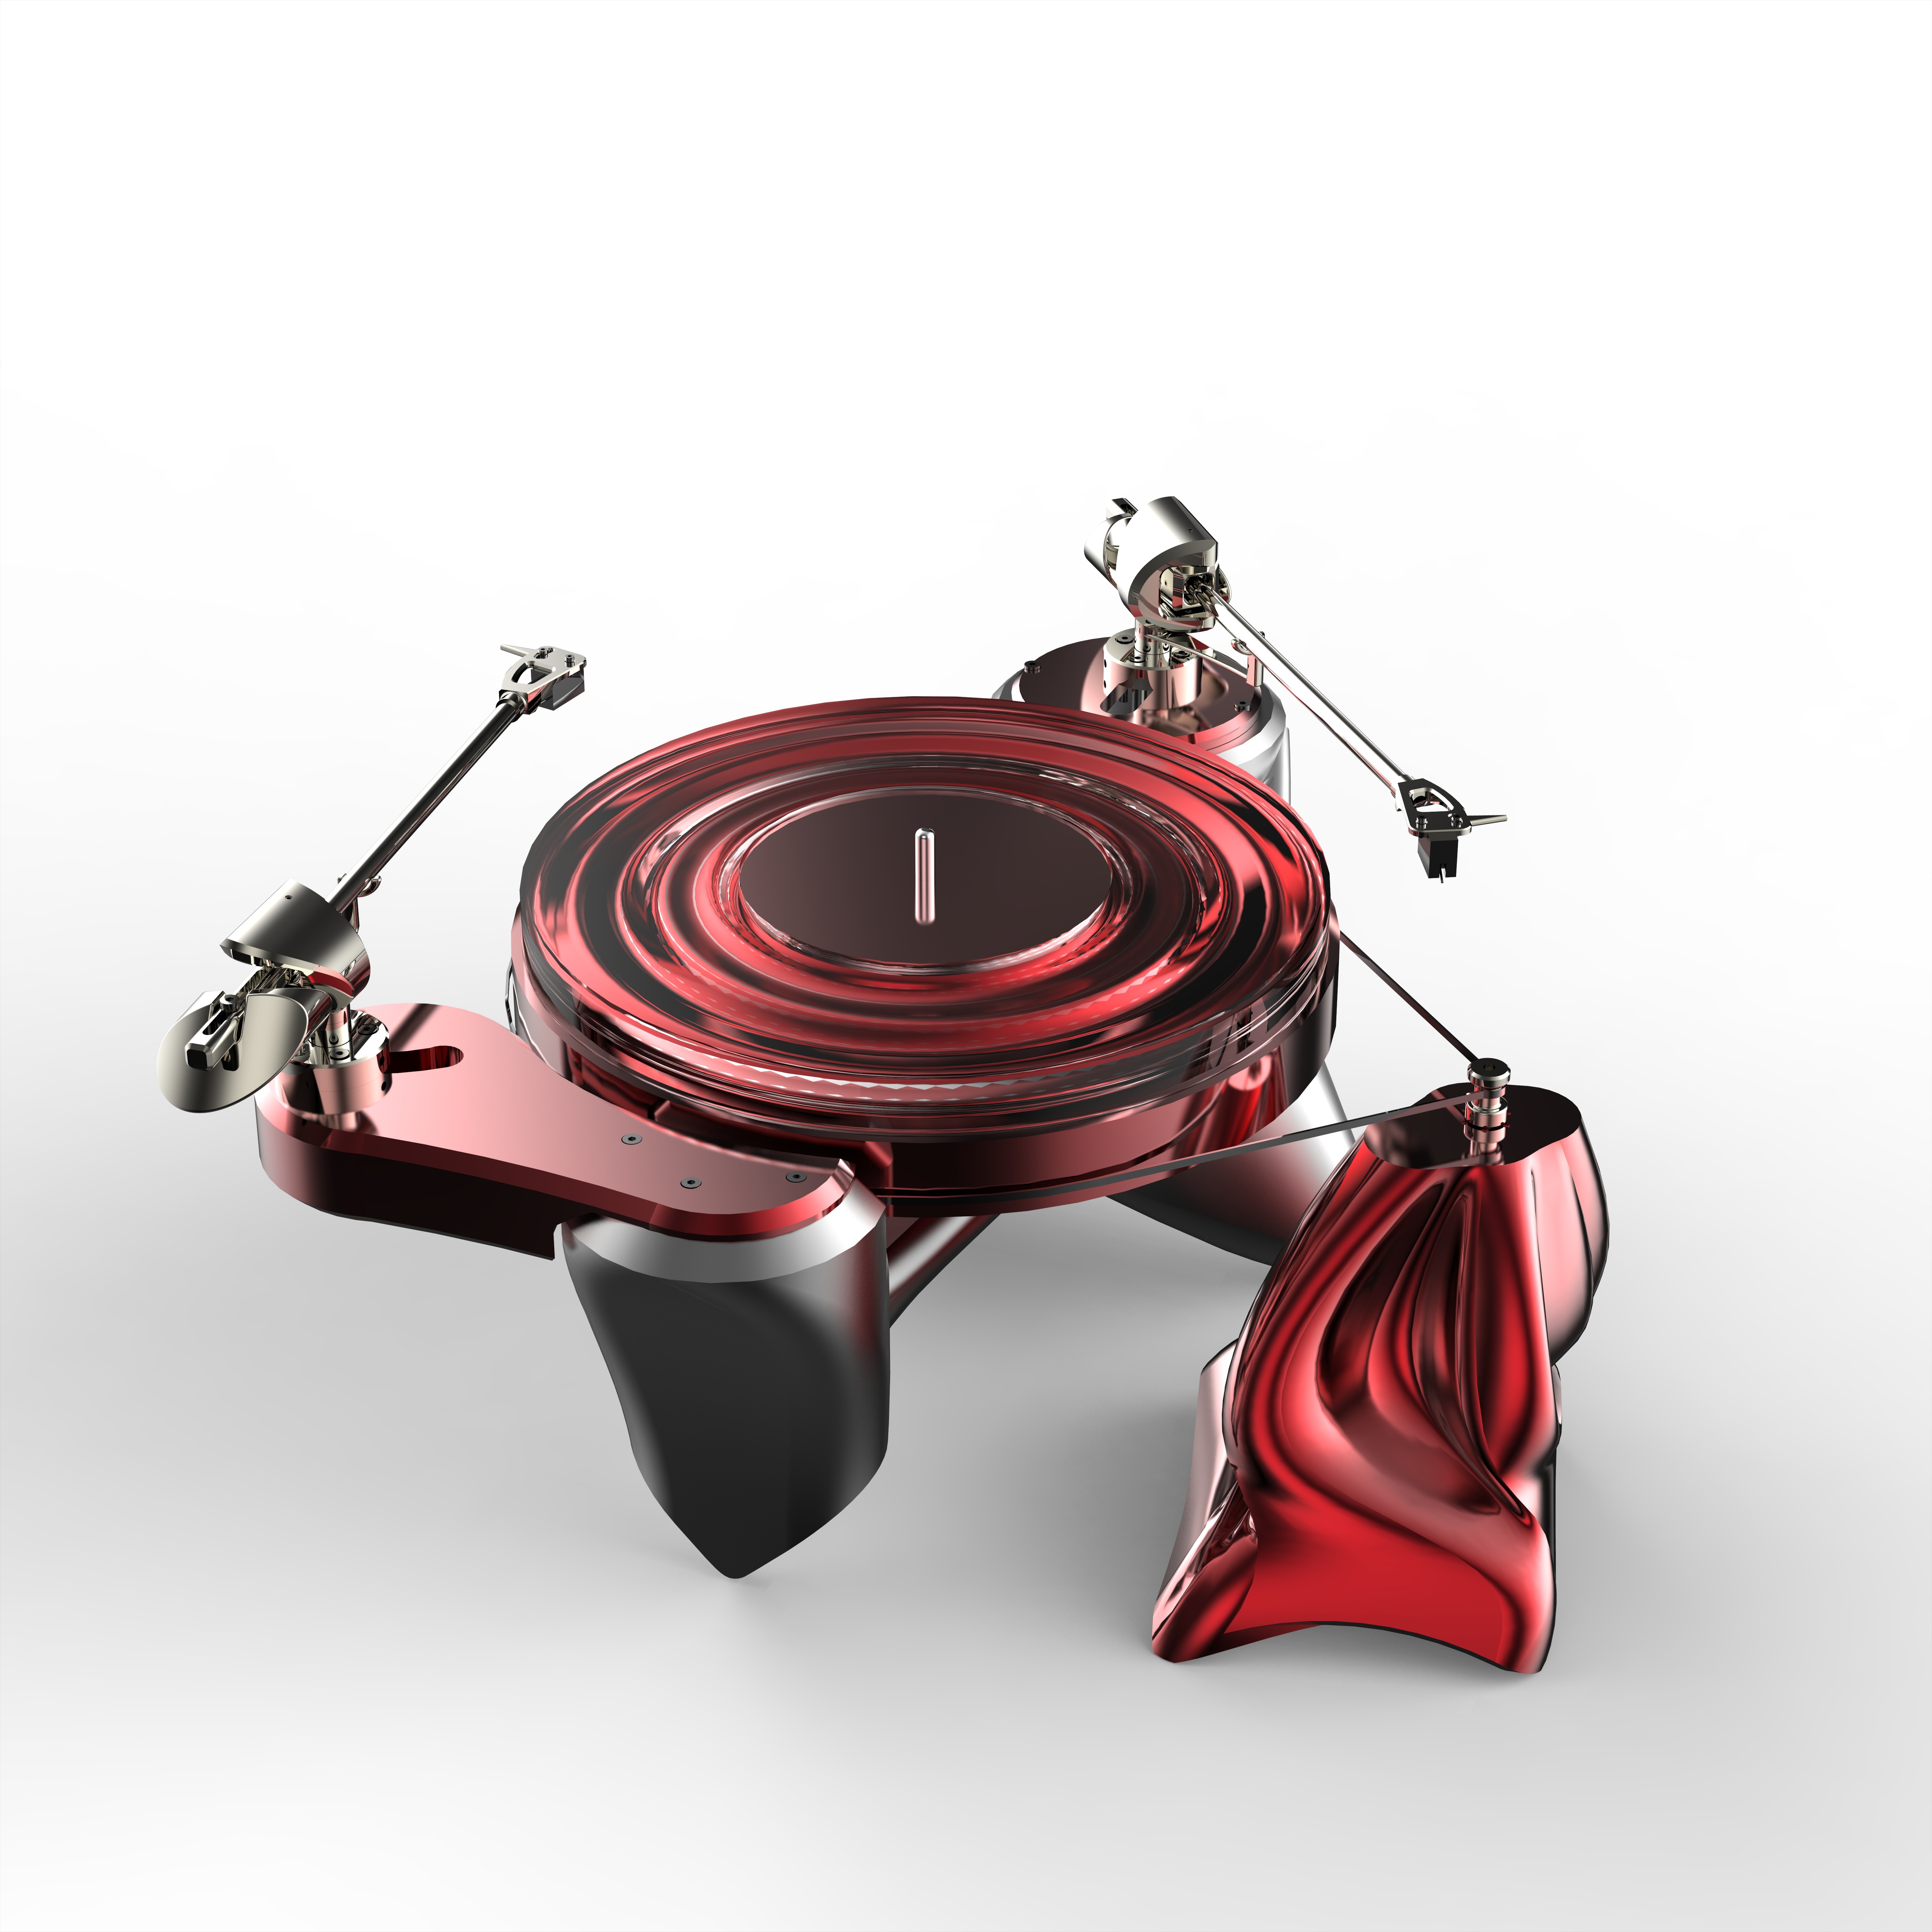 A futuristic turntable from Metaxas & Sins. It is part of the metaxas tatement that won this year's K-Design Award. Today's audiophiles are looking for not just quality but design and aesthetics.